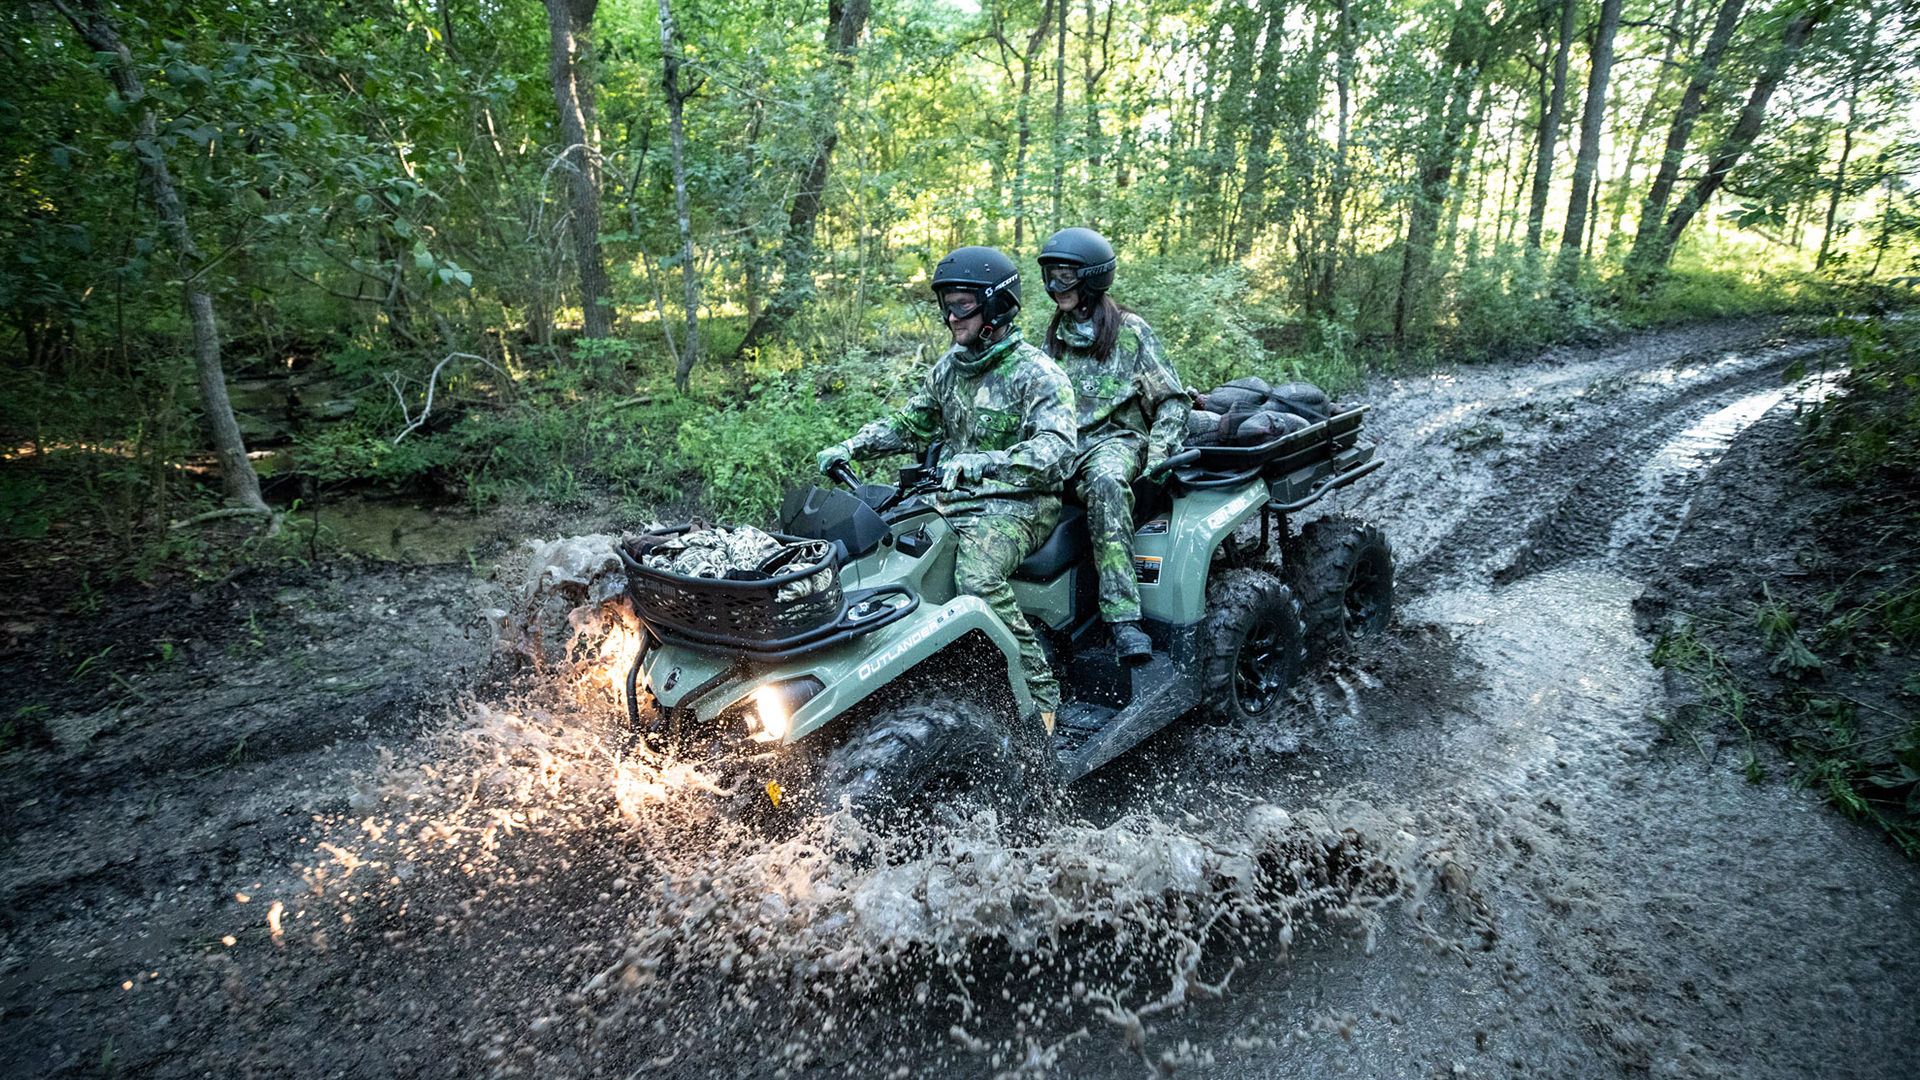 Outlander MAX 6x6 DPS riding in muddy waters